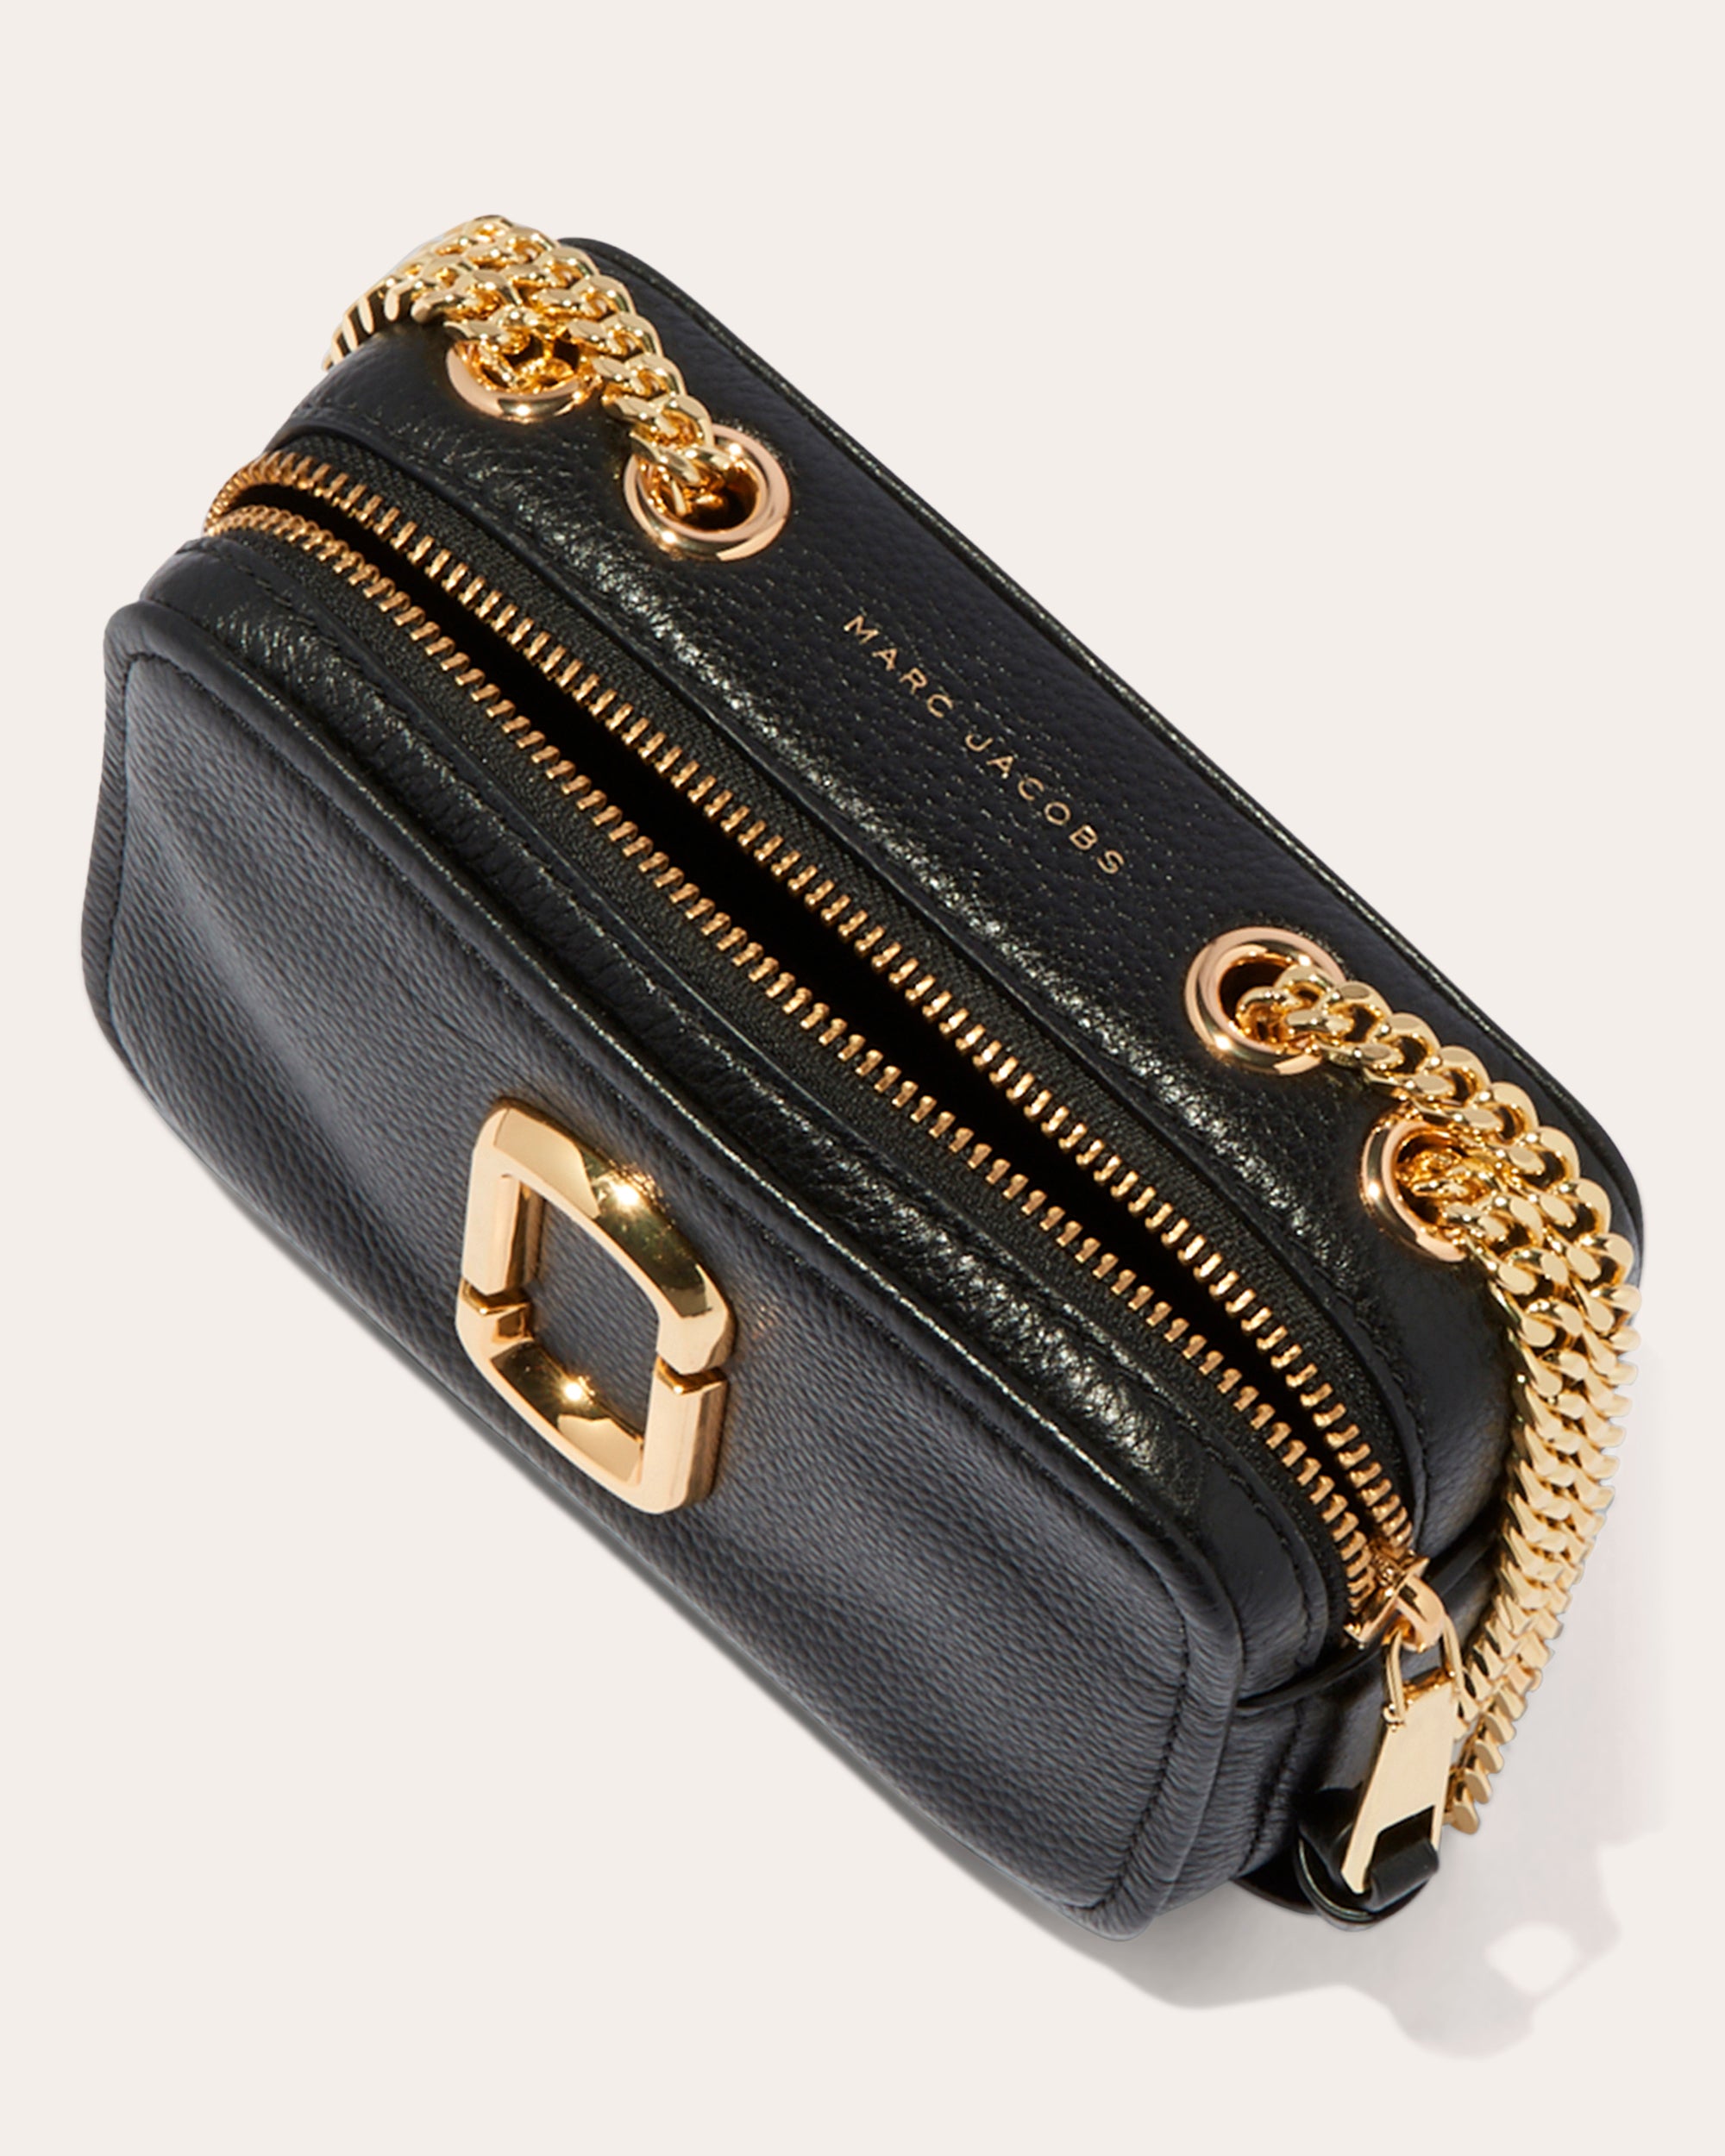 Marc Jacobs The Glam Shot 17 Leather Crossbody Bag